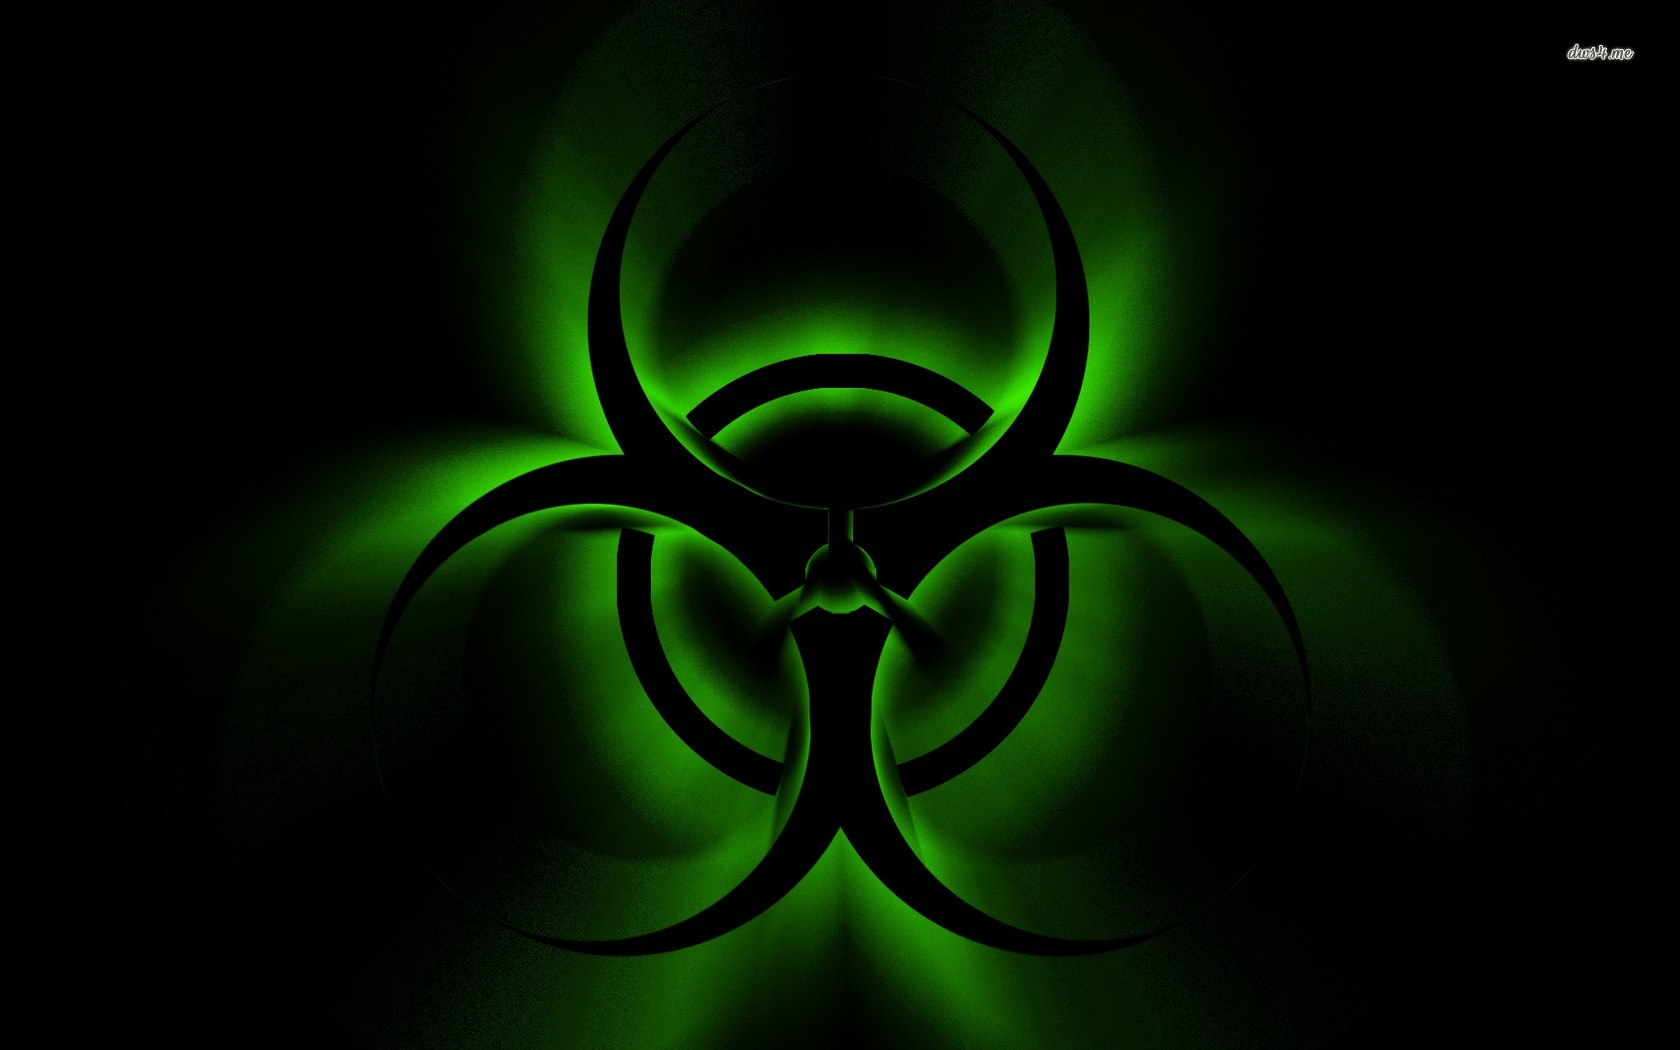 nuclear sign green